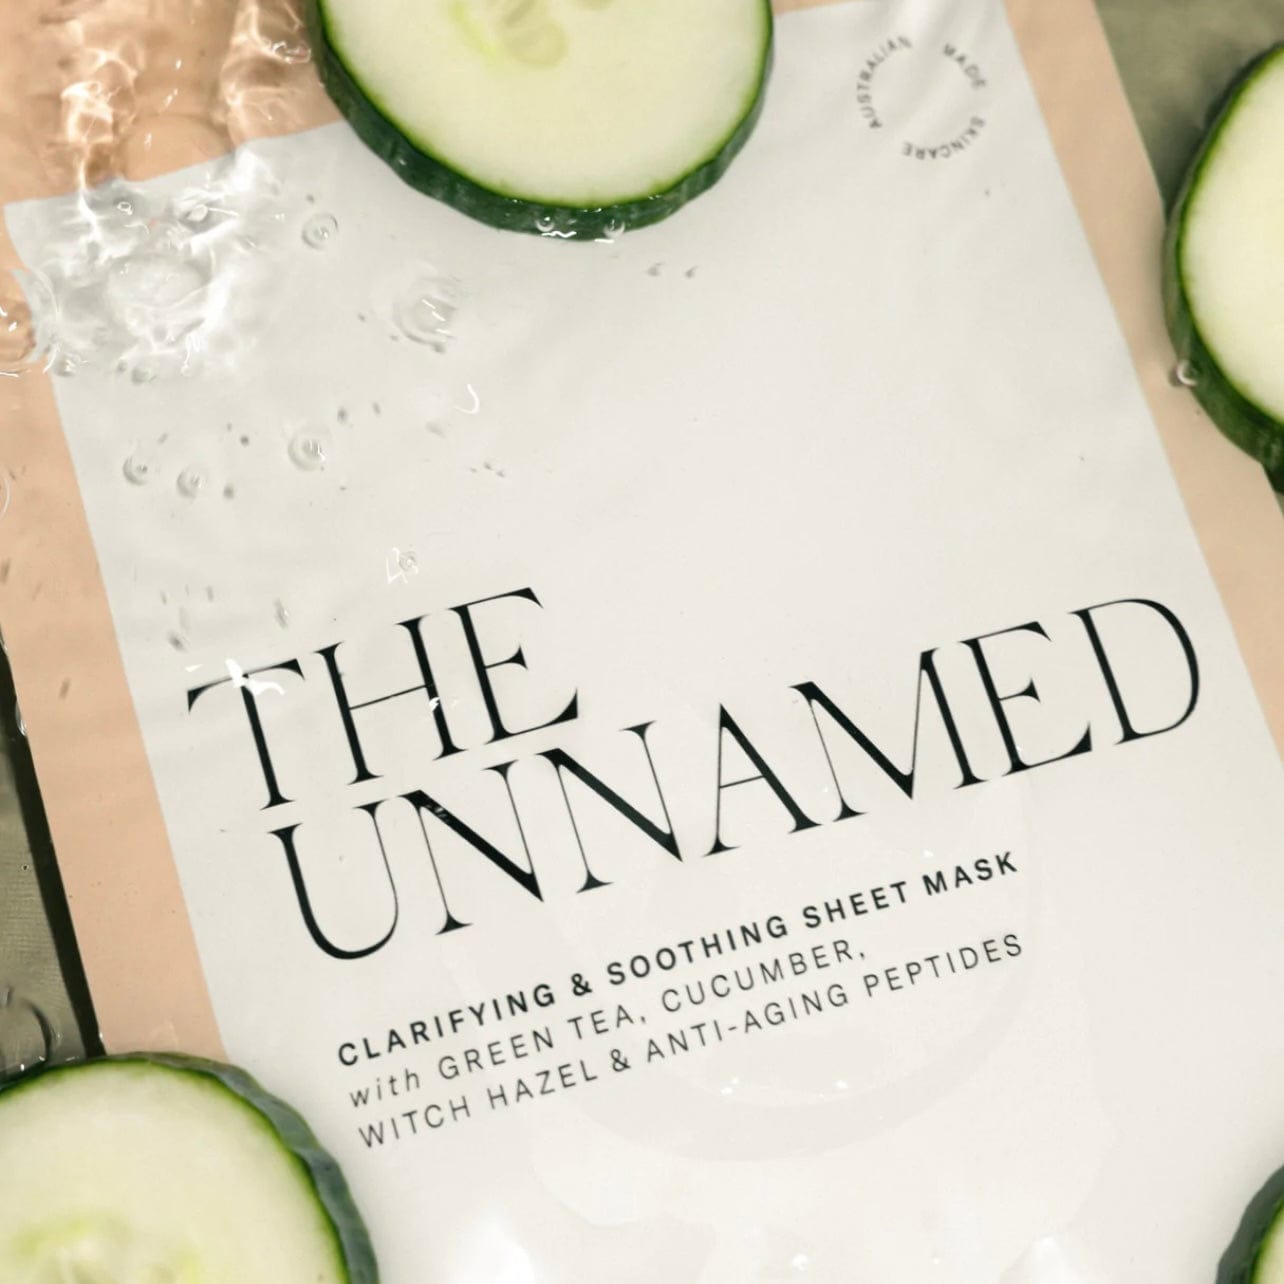 The Unnamed Sheet Mask Clarifying & Soothing by The Unnamed